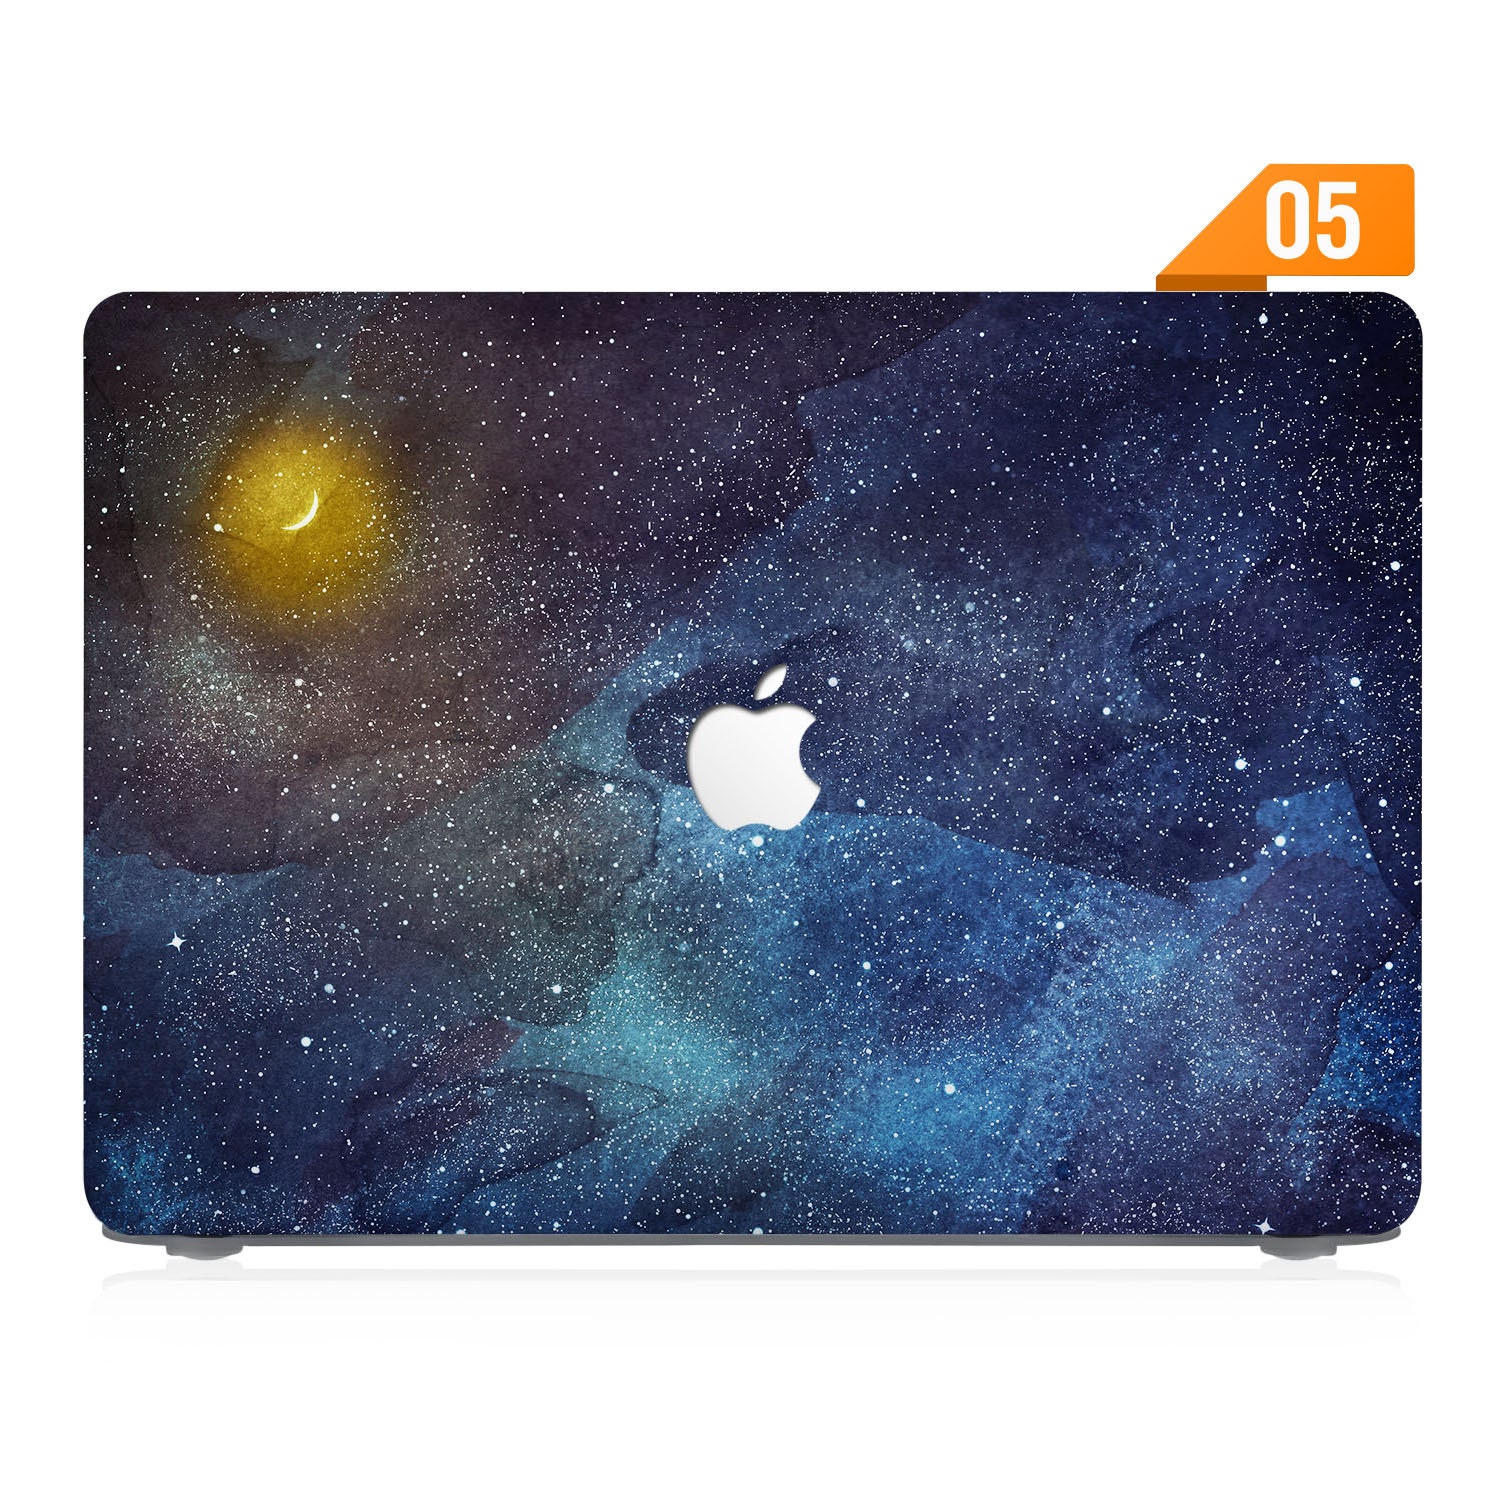 MacBook Case Rubberized Front and Bottom Hard Cover for Apple 